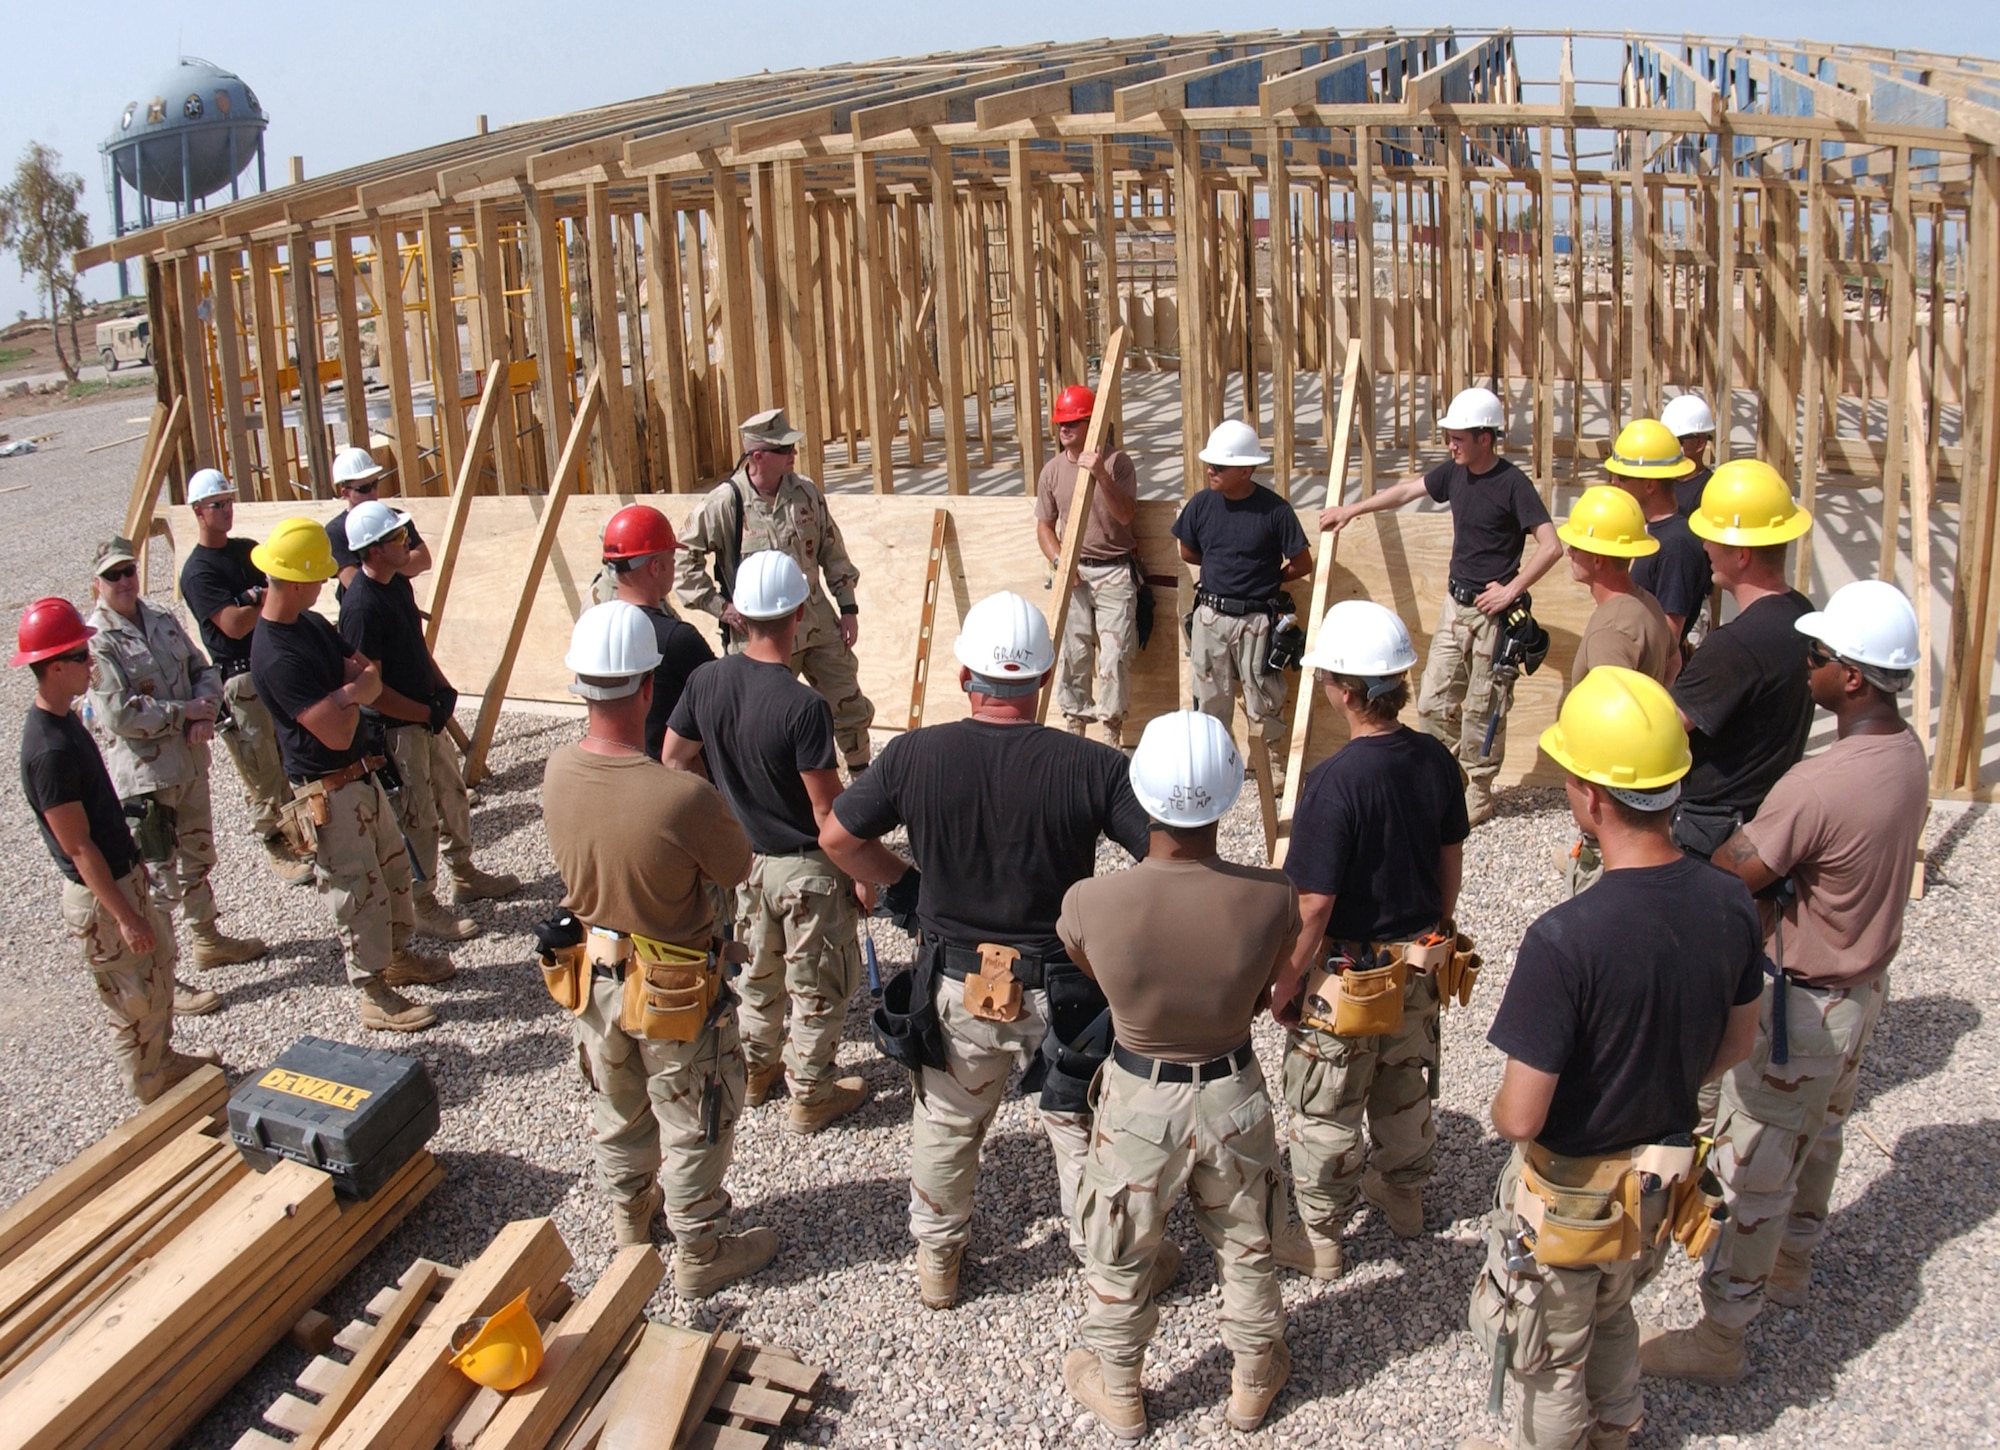 Chief Master Sgt. Layton Clark speaks with a structures team while they take a break from working on a 7,200-square-foot building for the U.S. State Department at Forward Operating Base Marez, Iraq, on Wednesday, April 26, 2006. Chief Clark is the 332nd Air Expeditionary Wing command chief. (U.S. Air Force photo/Airman 1st Class Jason Ridder)                  